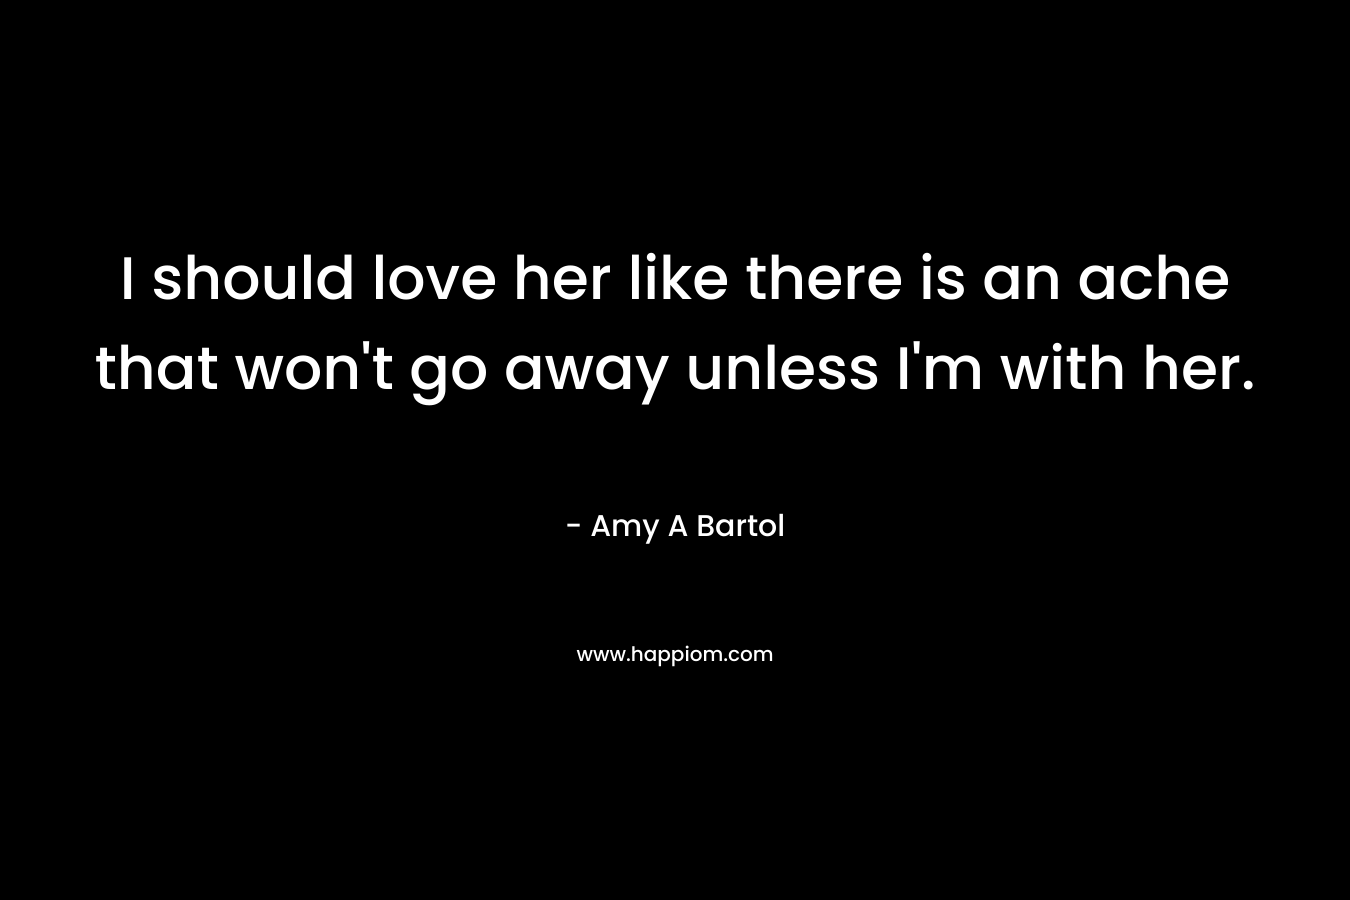 I should love her like there is an ache that won’t go away unless I’m with her. – Amy A Bartol